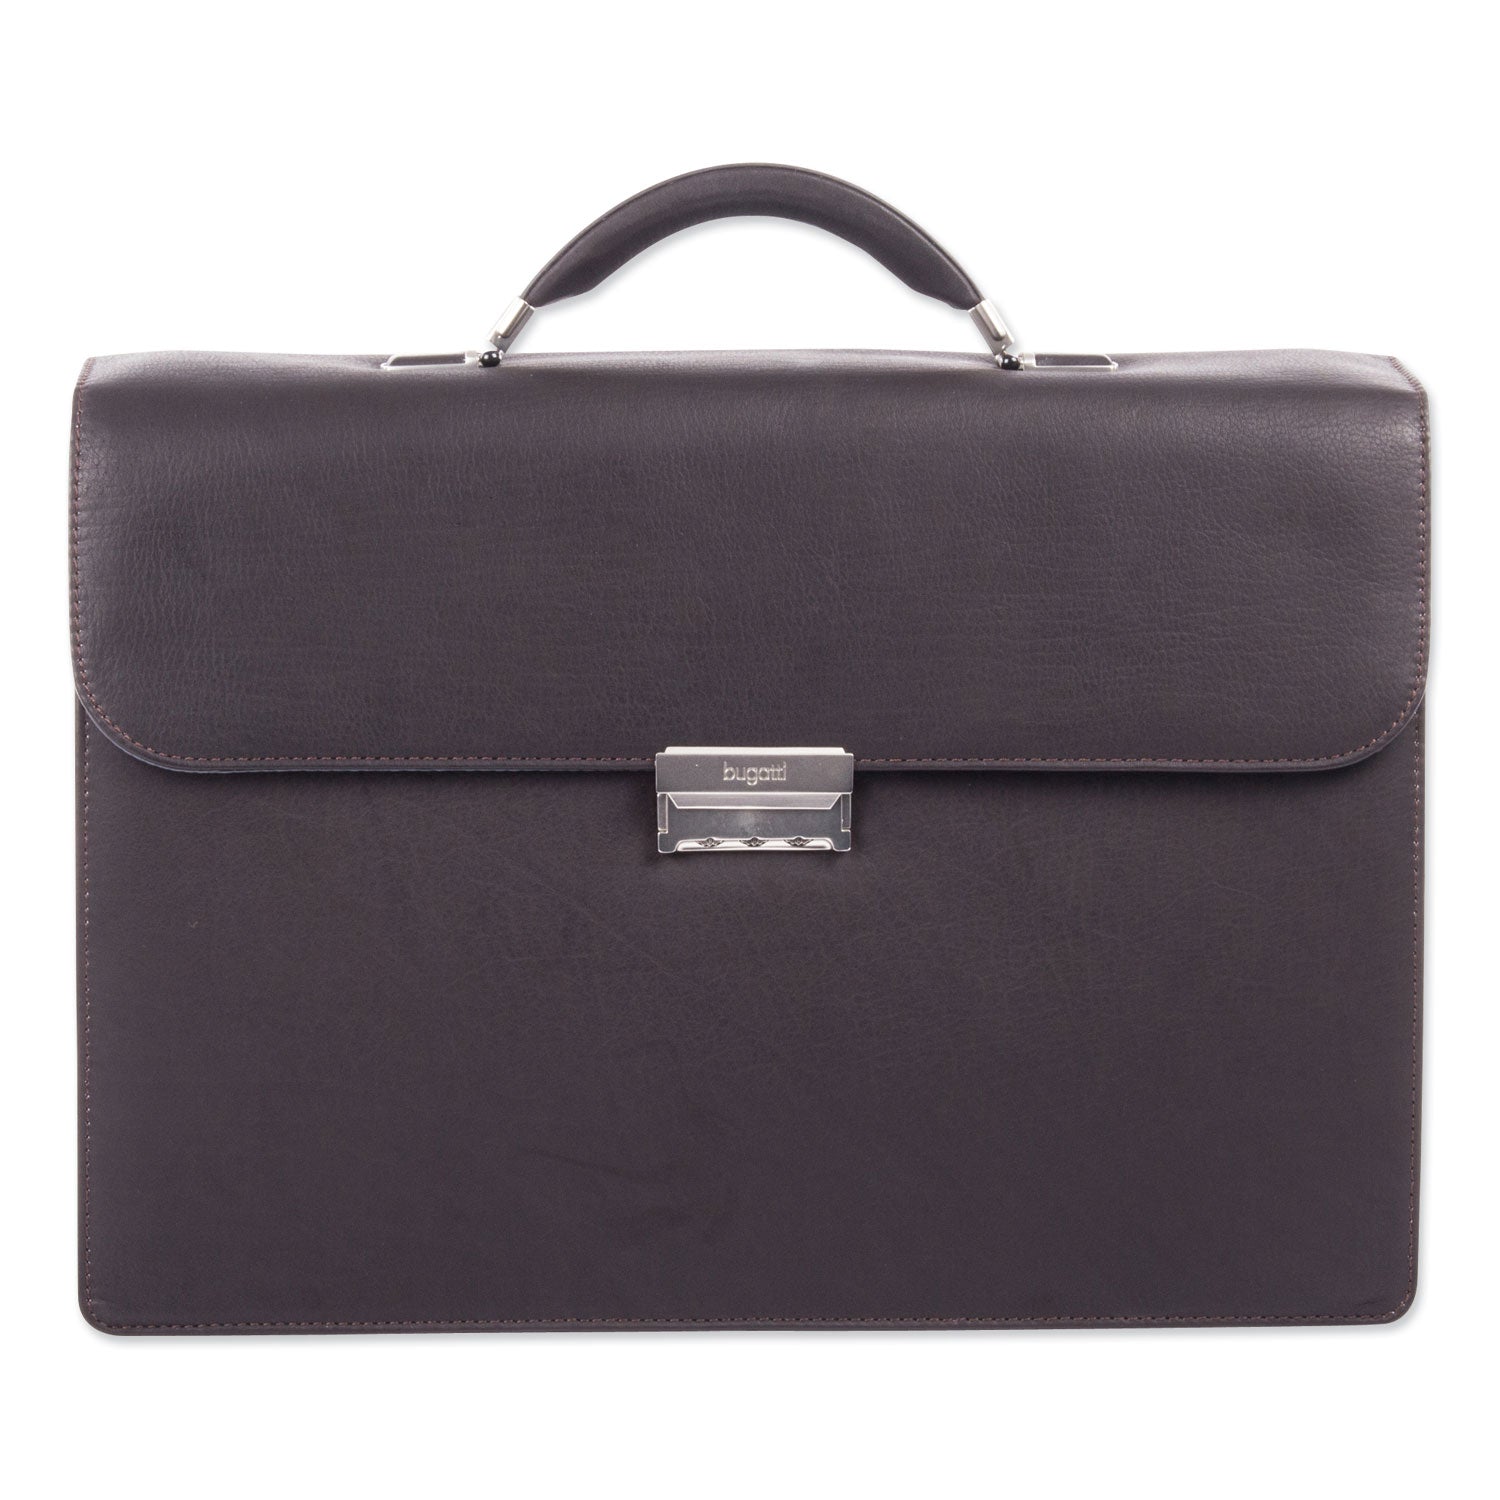 milestone-briefcase-fits-devices-up-to-156-leather-5-x-5-x-12-brown_swz49545802sm - 2